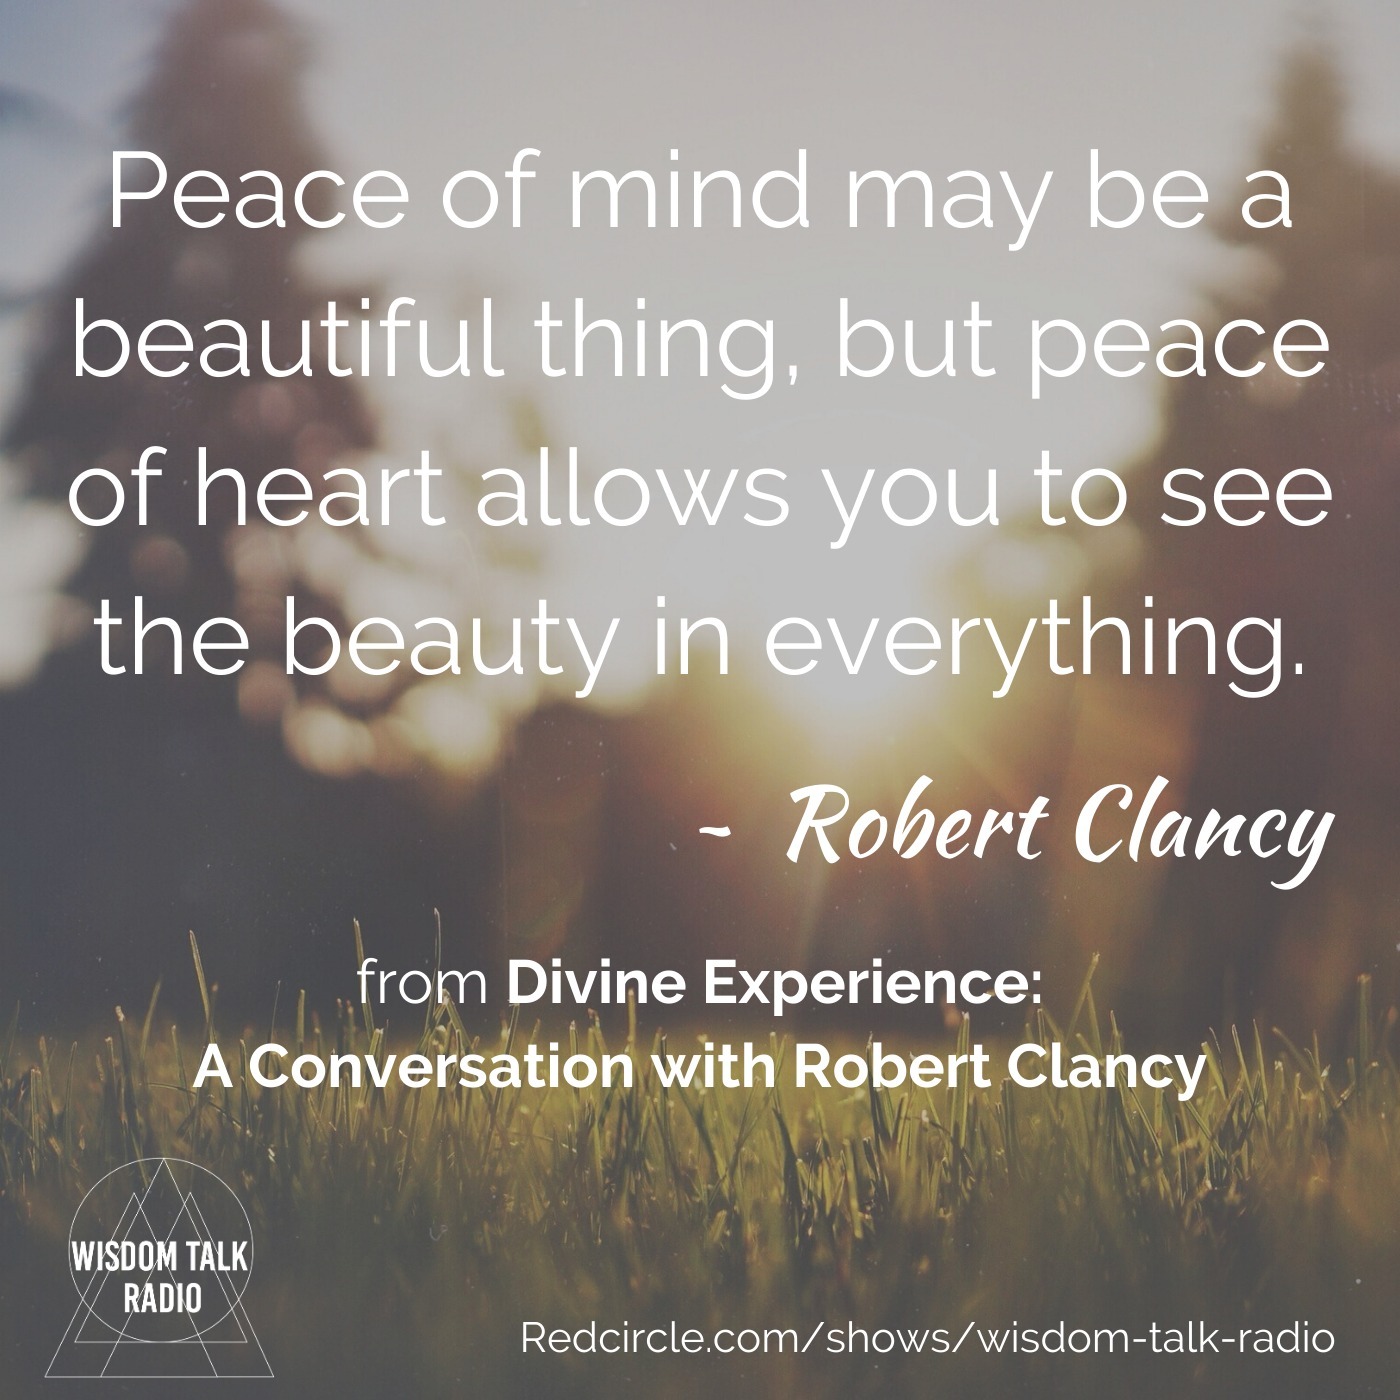 Divine Experience: A Conversation with Robert Clancy